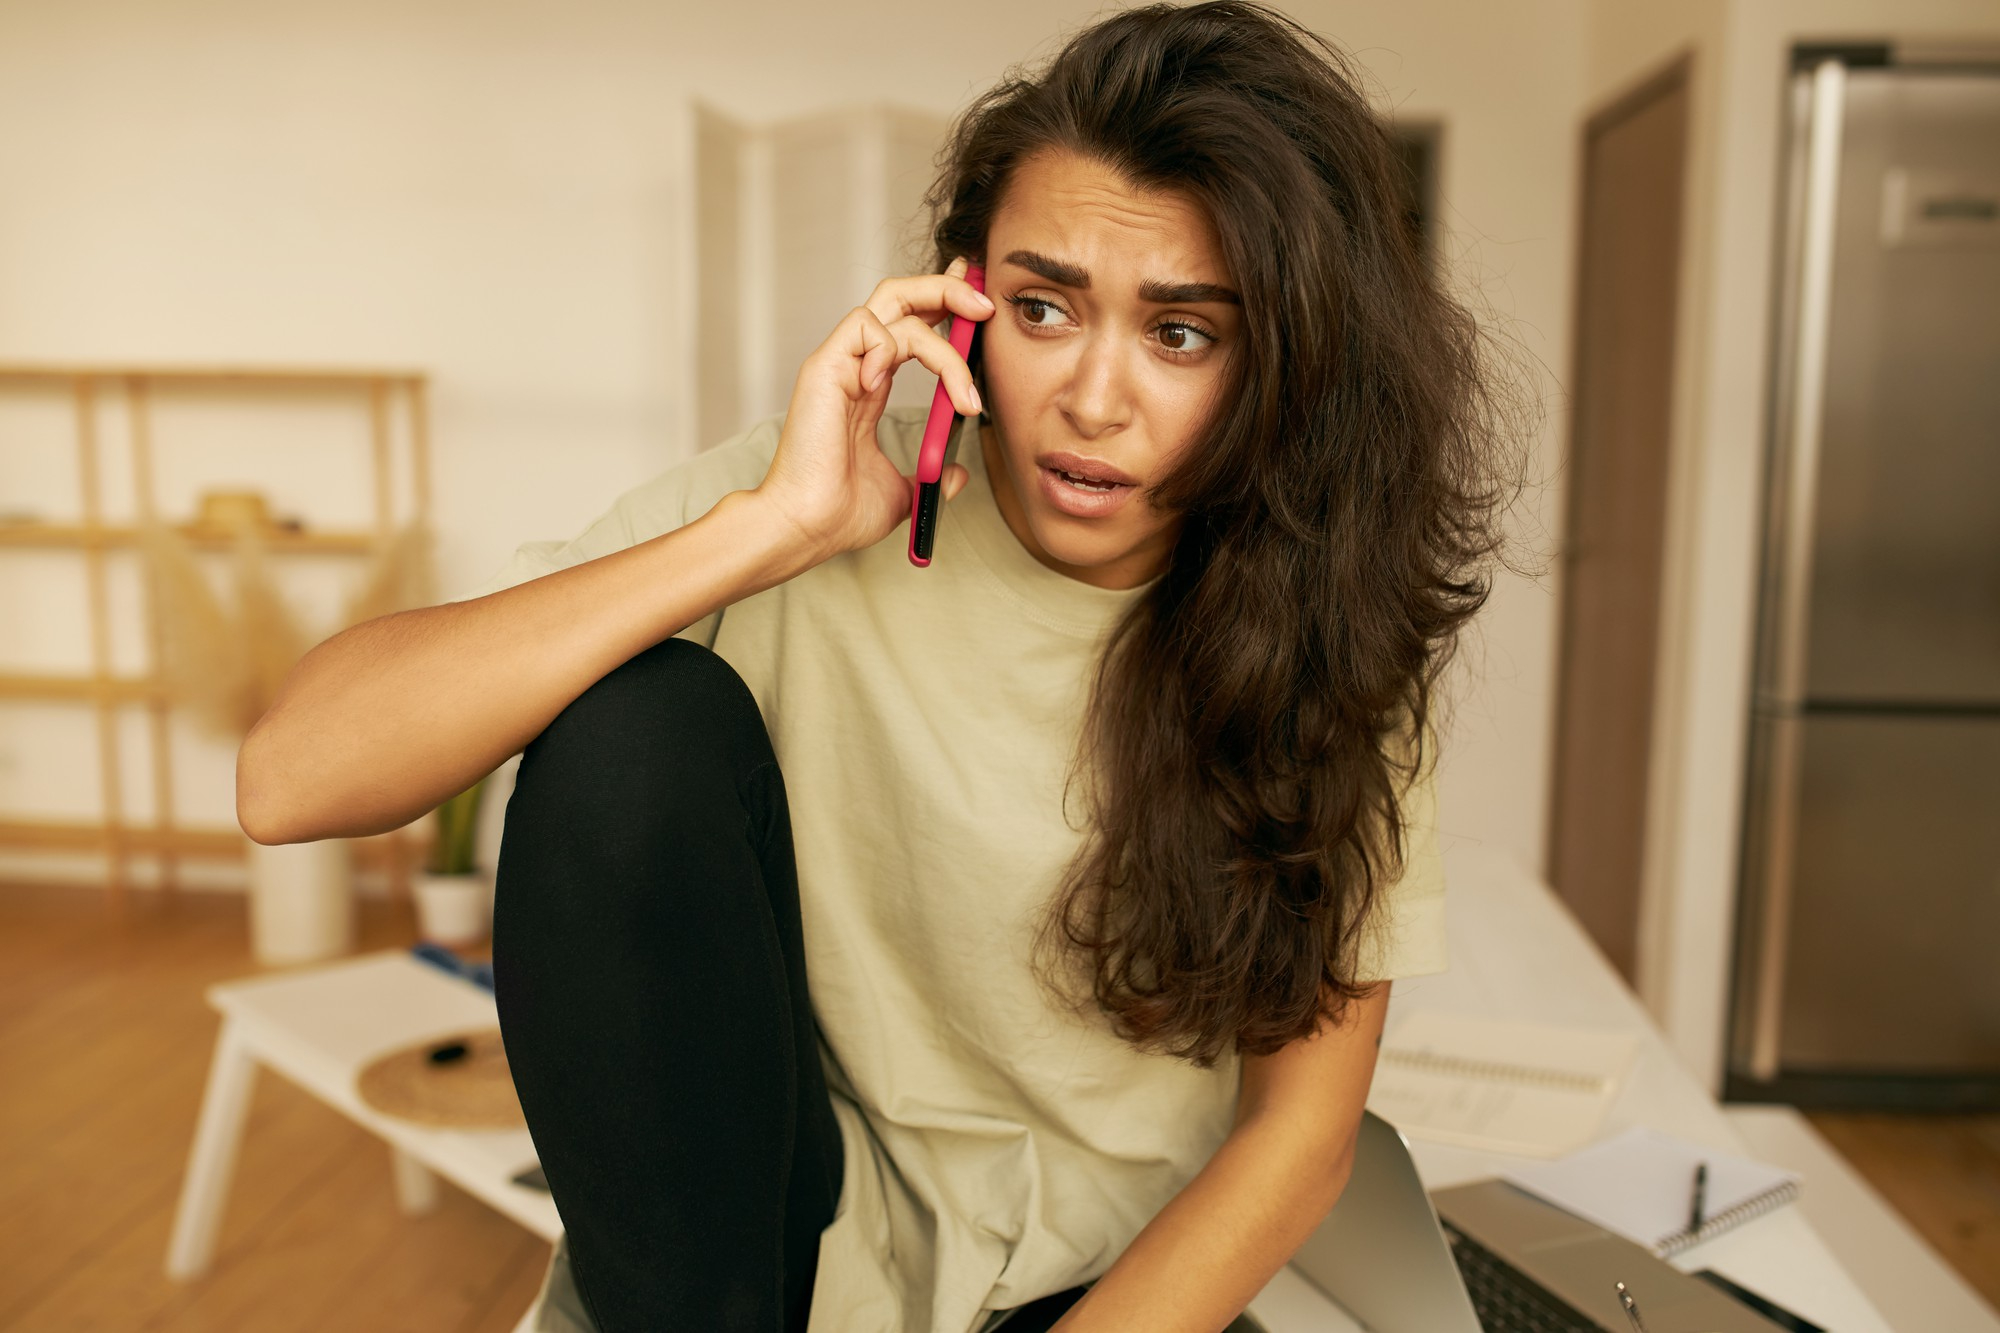 An upset woman talking on the phone | Source: Pexels